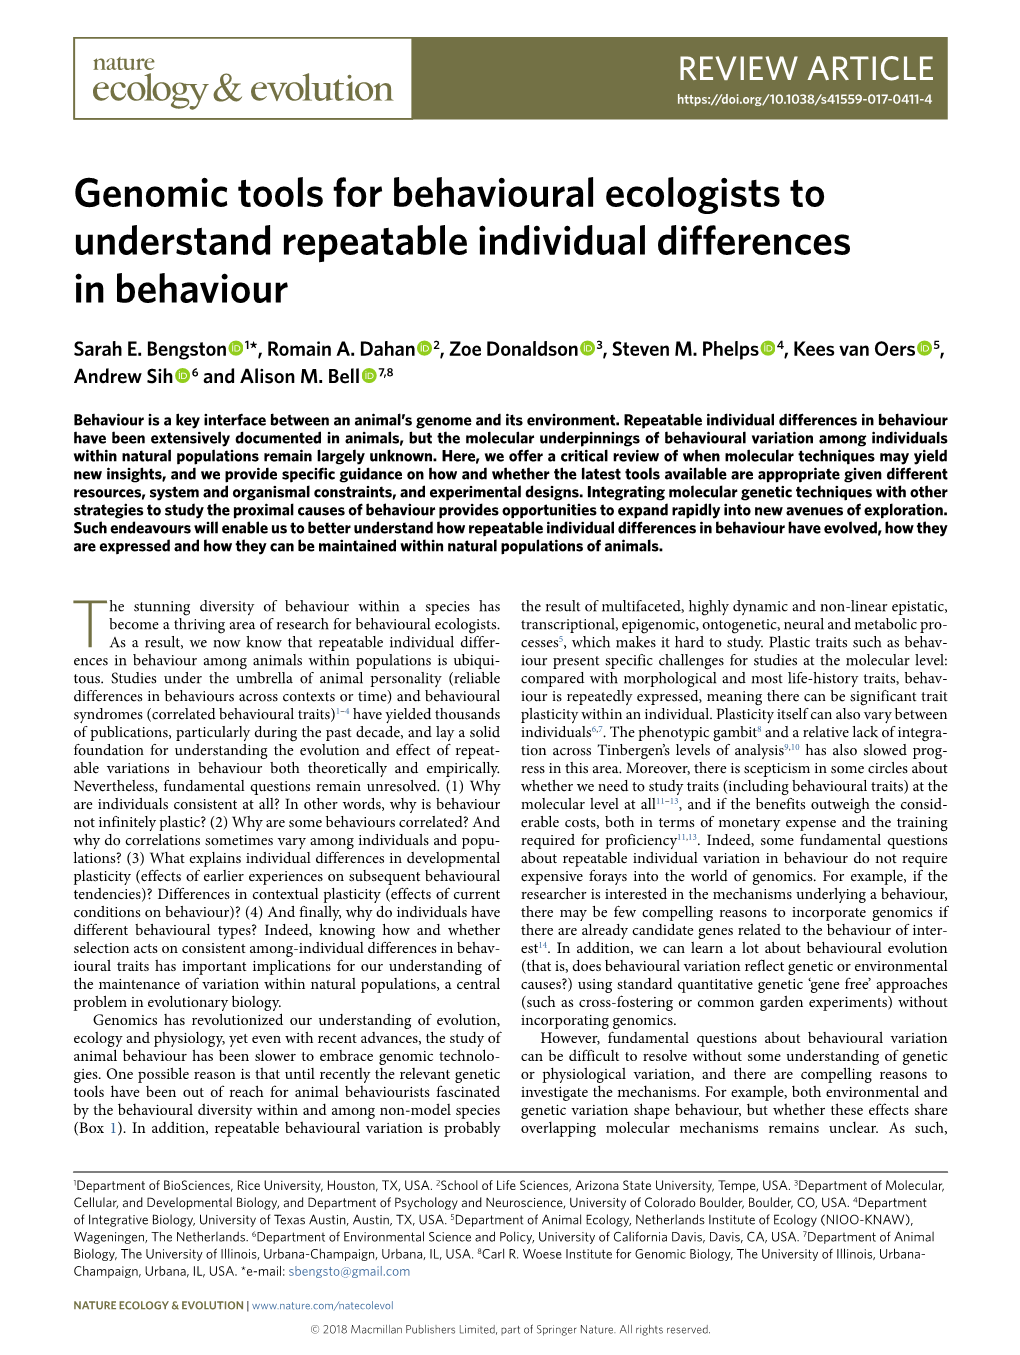 Genomic Tools for Behavioural Ecologists to Understand Repeatable Individual Differences in Behaviour